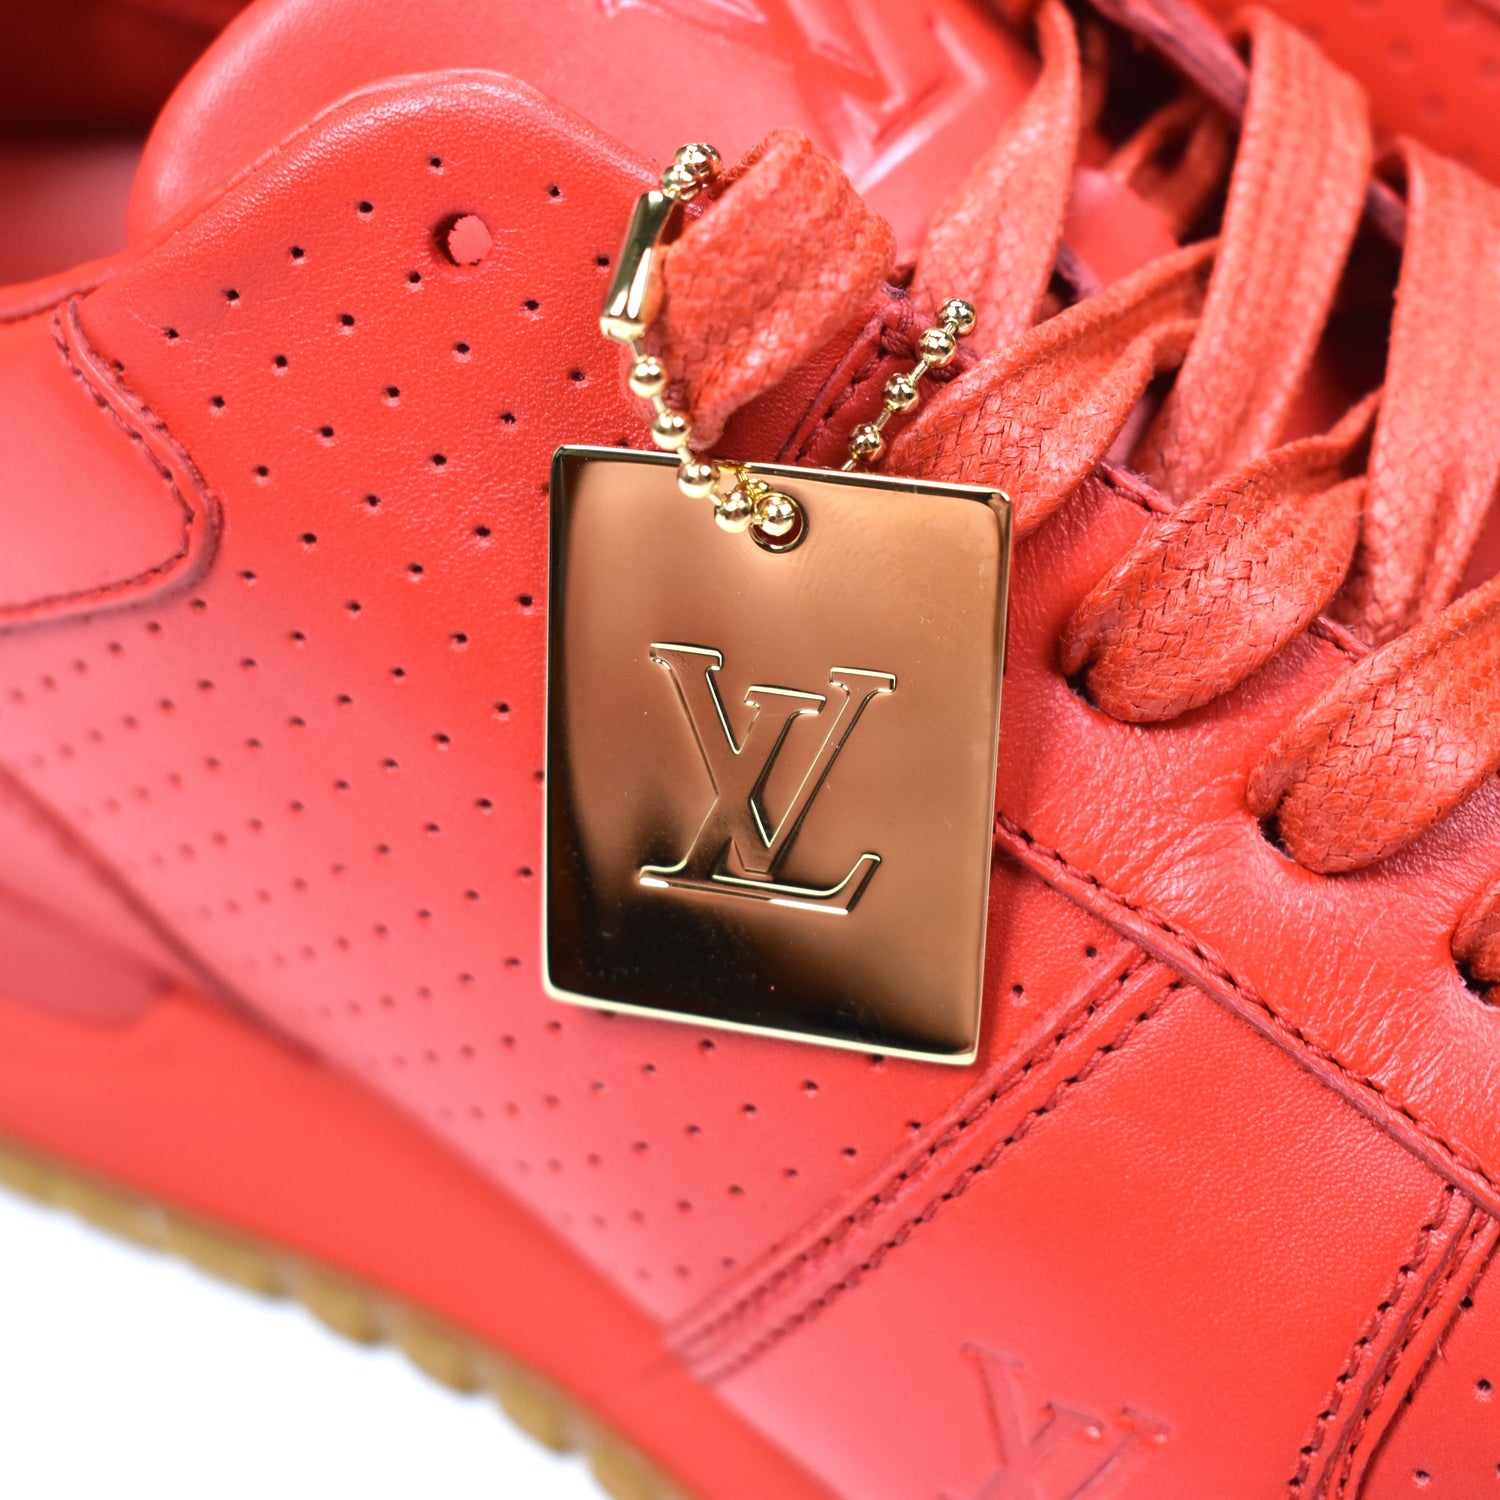 Louis Vuitton x Supreme - Red Leather Run Away Logo Embossed Sneakers –  eluXive